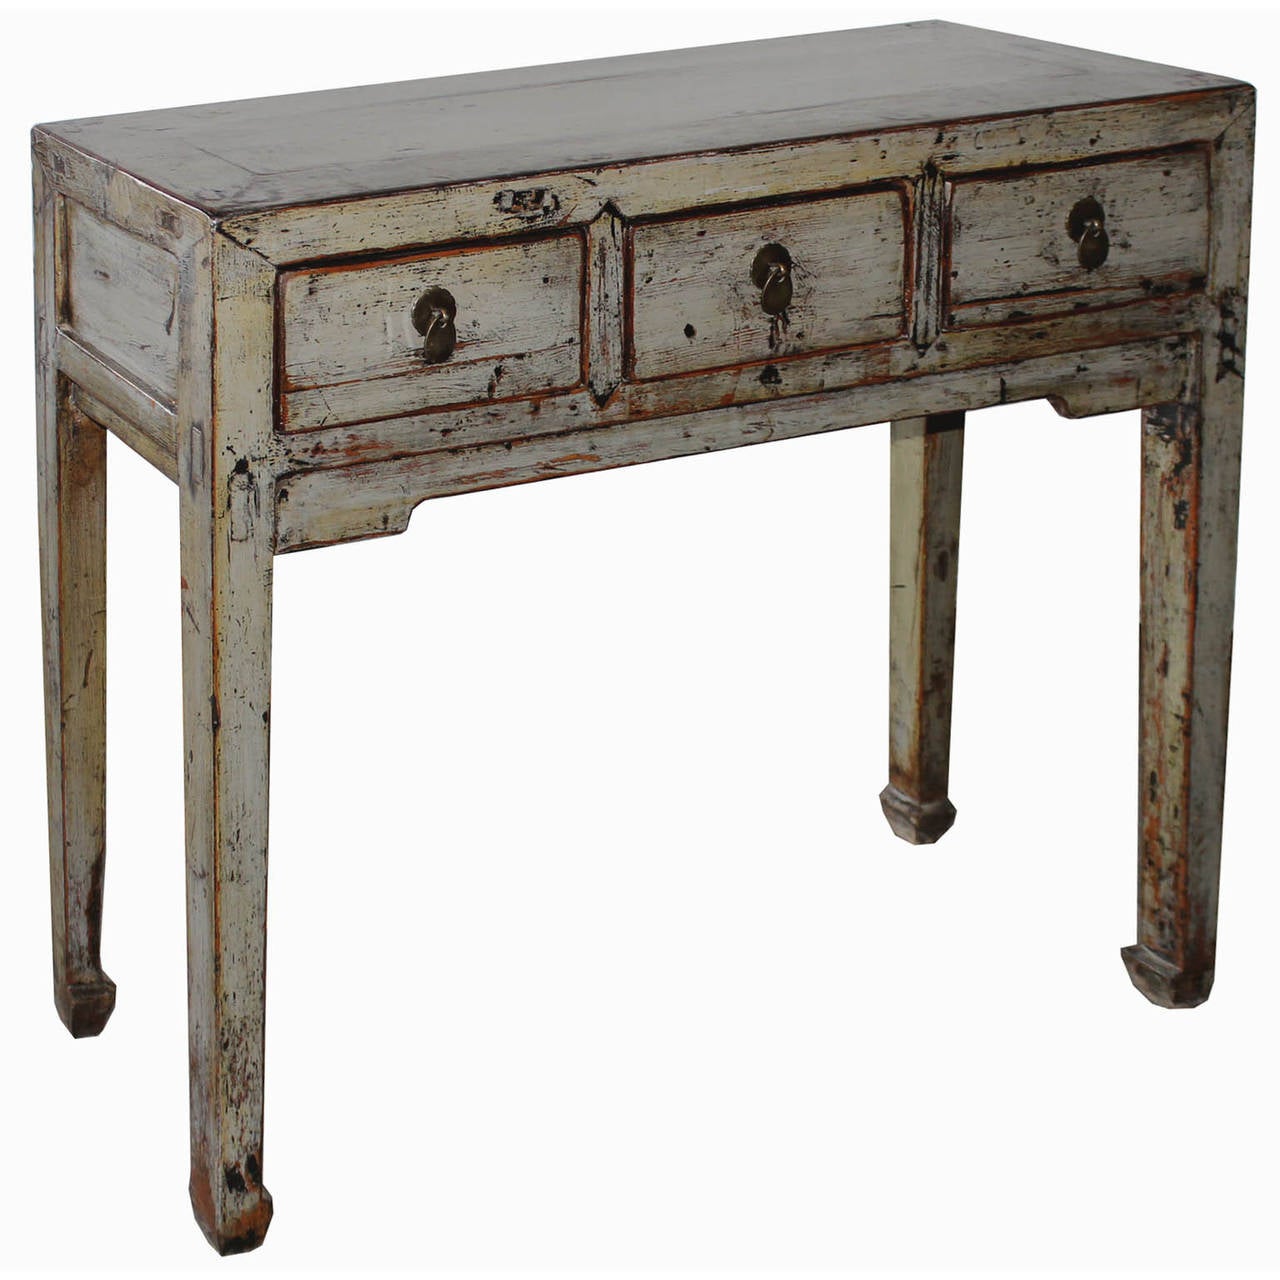 Three-drawer gray lacquer console table with exposed wood edges and horse-hoof feet. New hardware. Shandong, China circa 1900s.